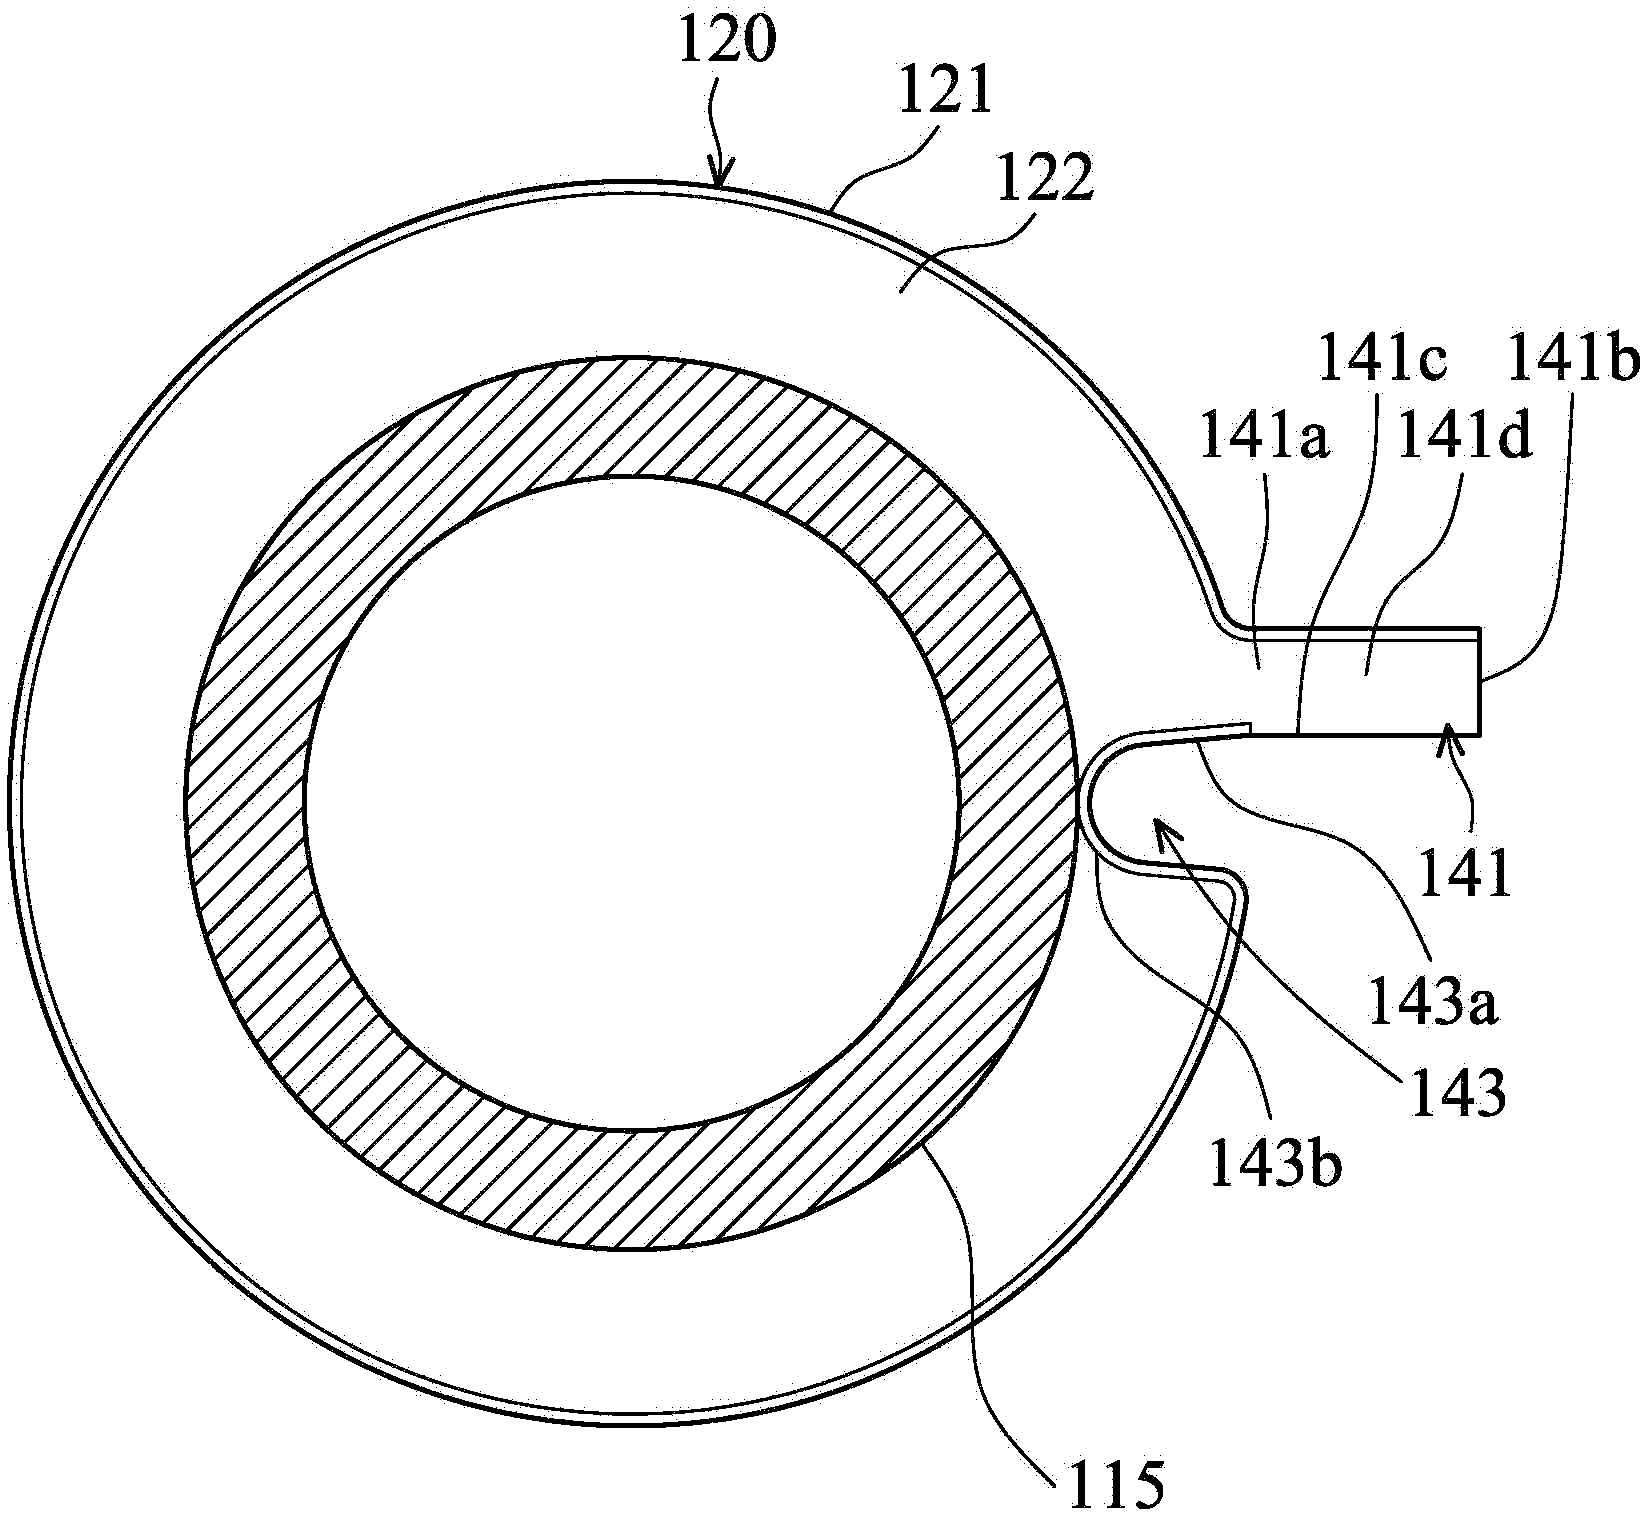 Winder and method for winding wire on winder